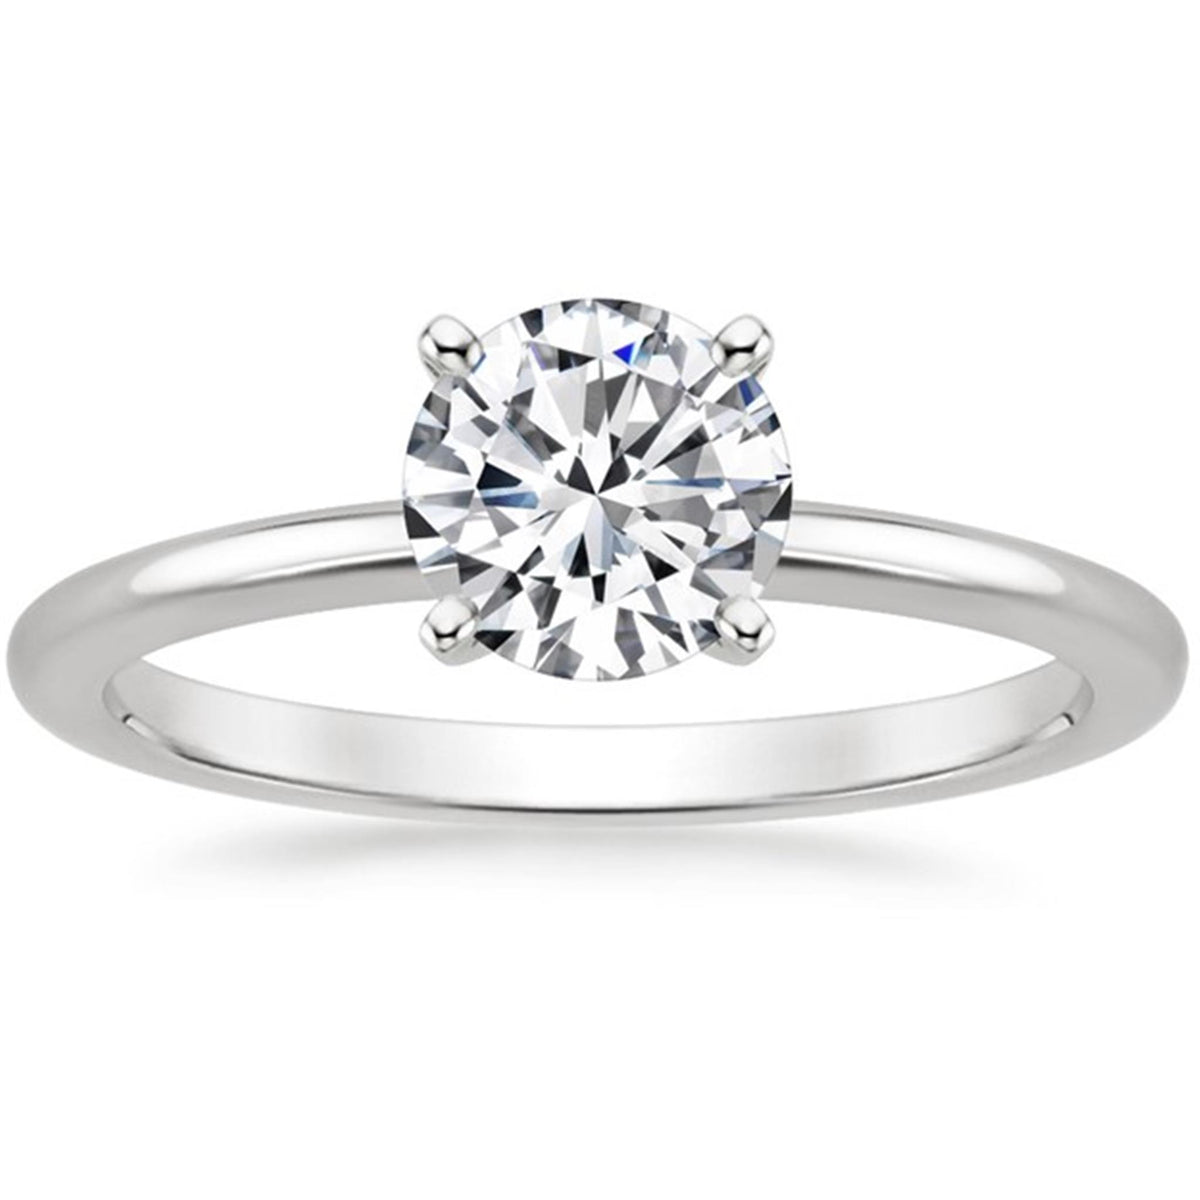 18Kt White Gold Solitaire Ring With 1.03ct Fire and Ice Ideal Cut Natural Diamond